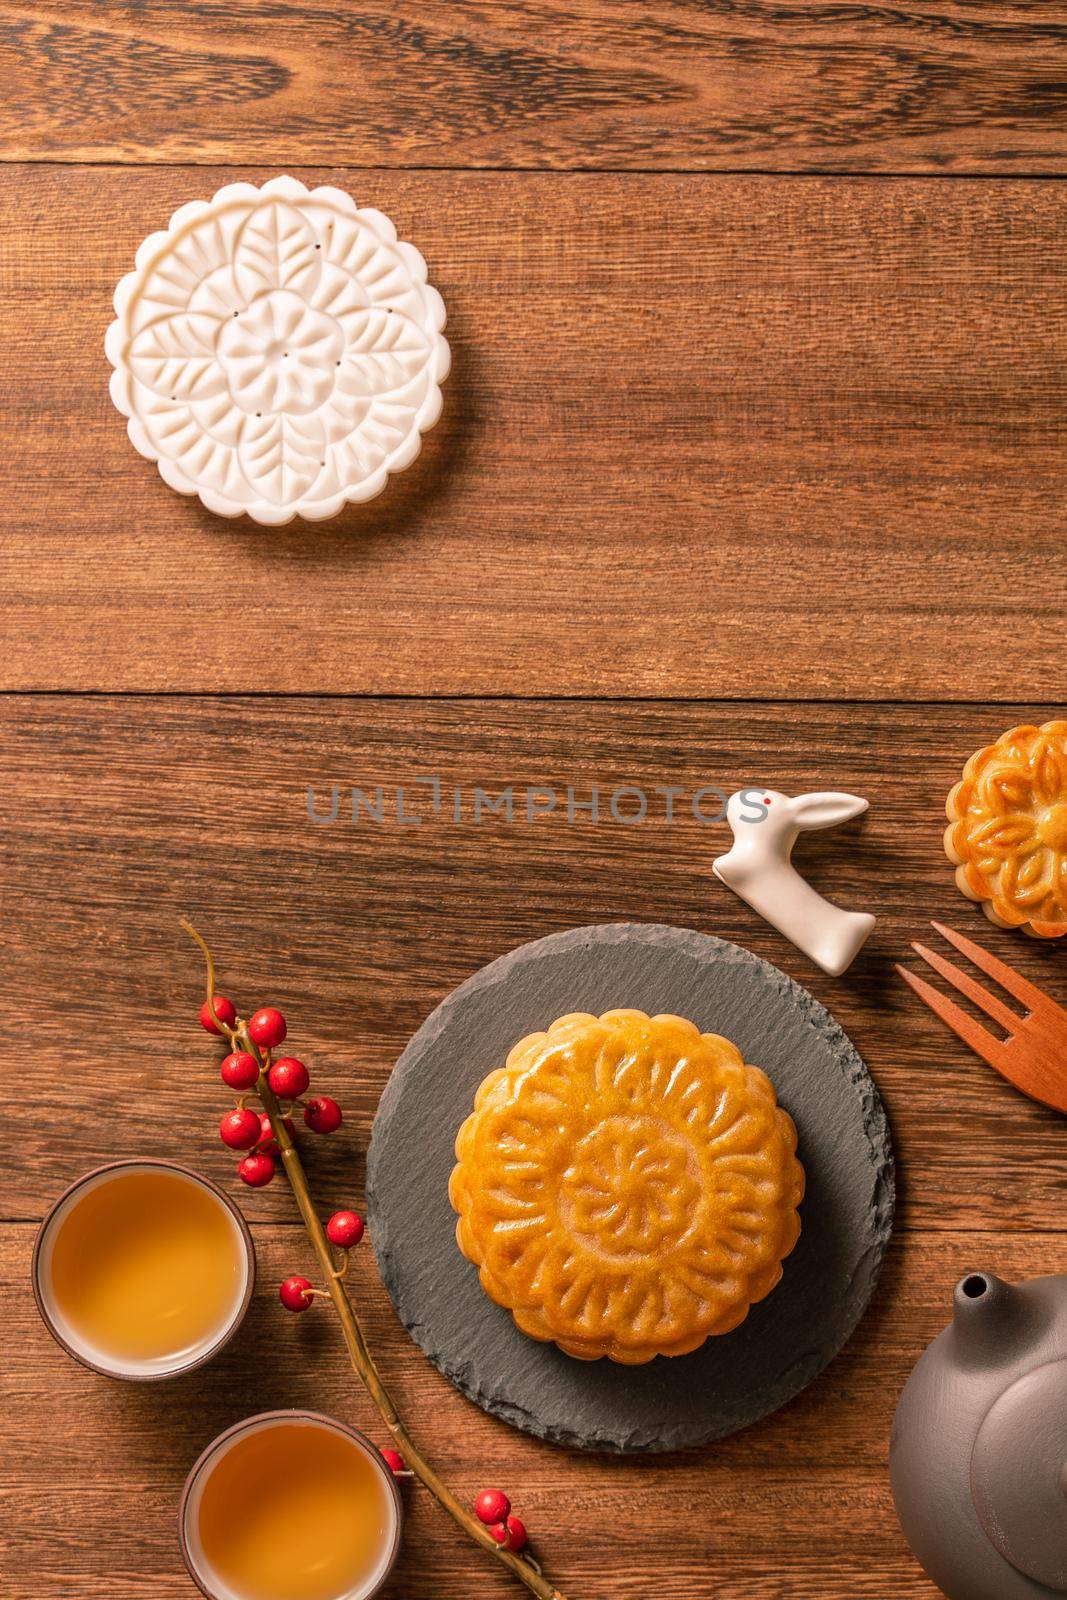 Creative Moon cake Mooncake table design - Chinese traditional pastry with tea cups on wooden background, Mid-Autumn Festival concept, top view, flat lay. by ROMIXIMAGE